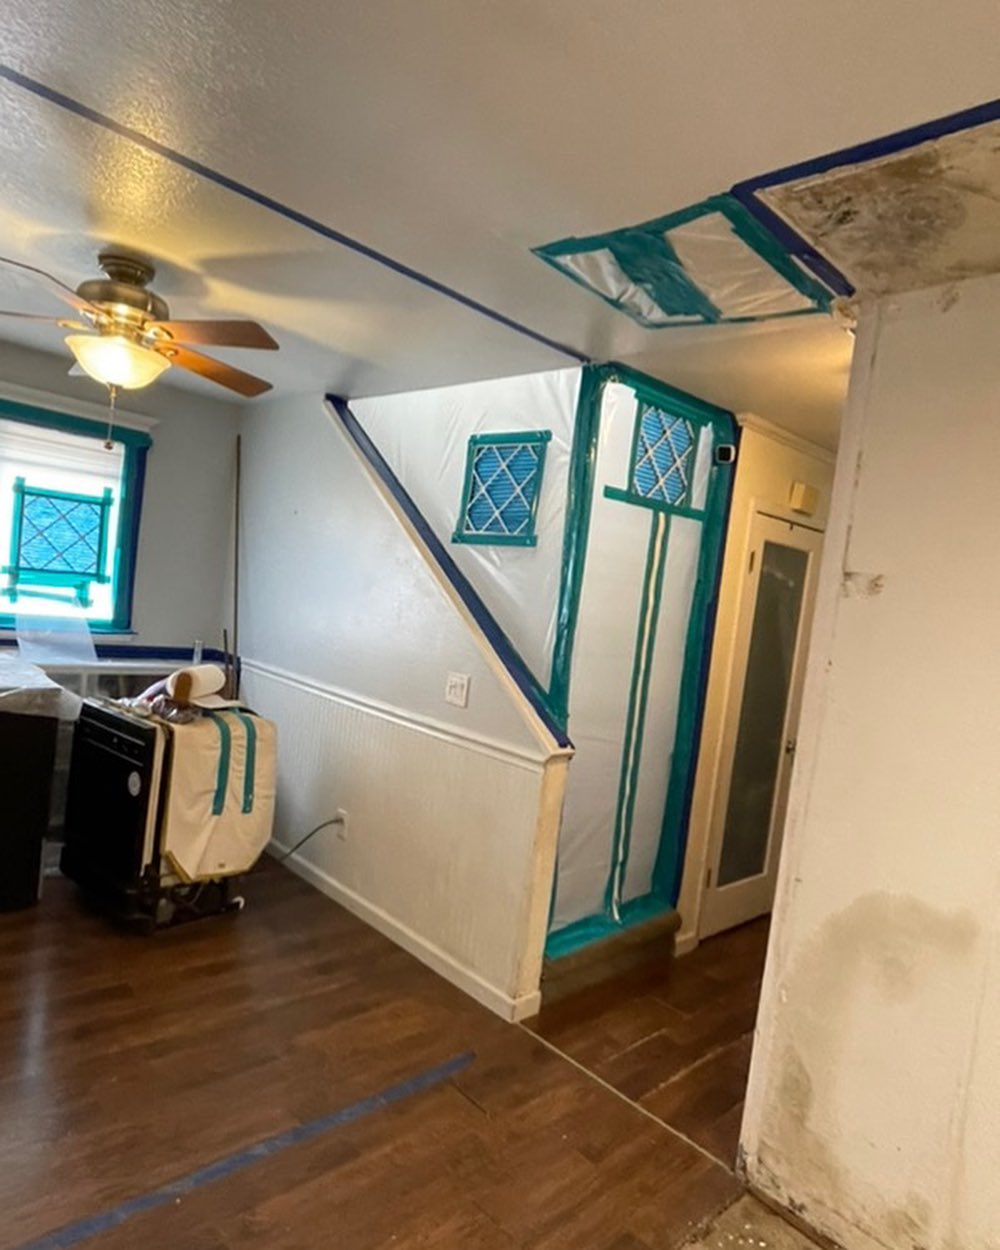 Interior of a house under renovation showing taped edges and unpainted walls, with a fan on the ceiling and a cart in the corner.